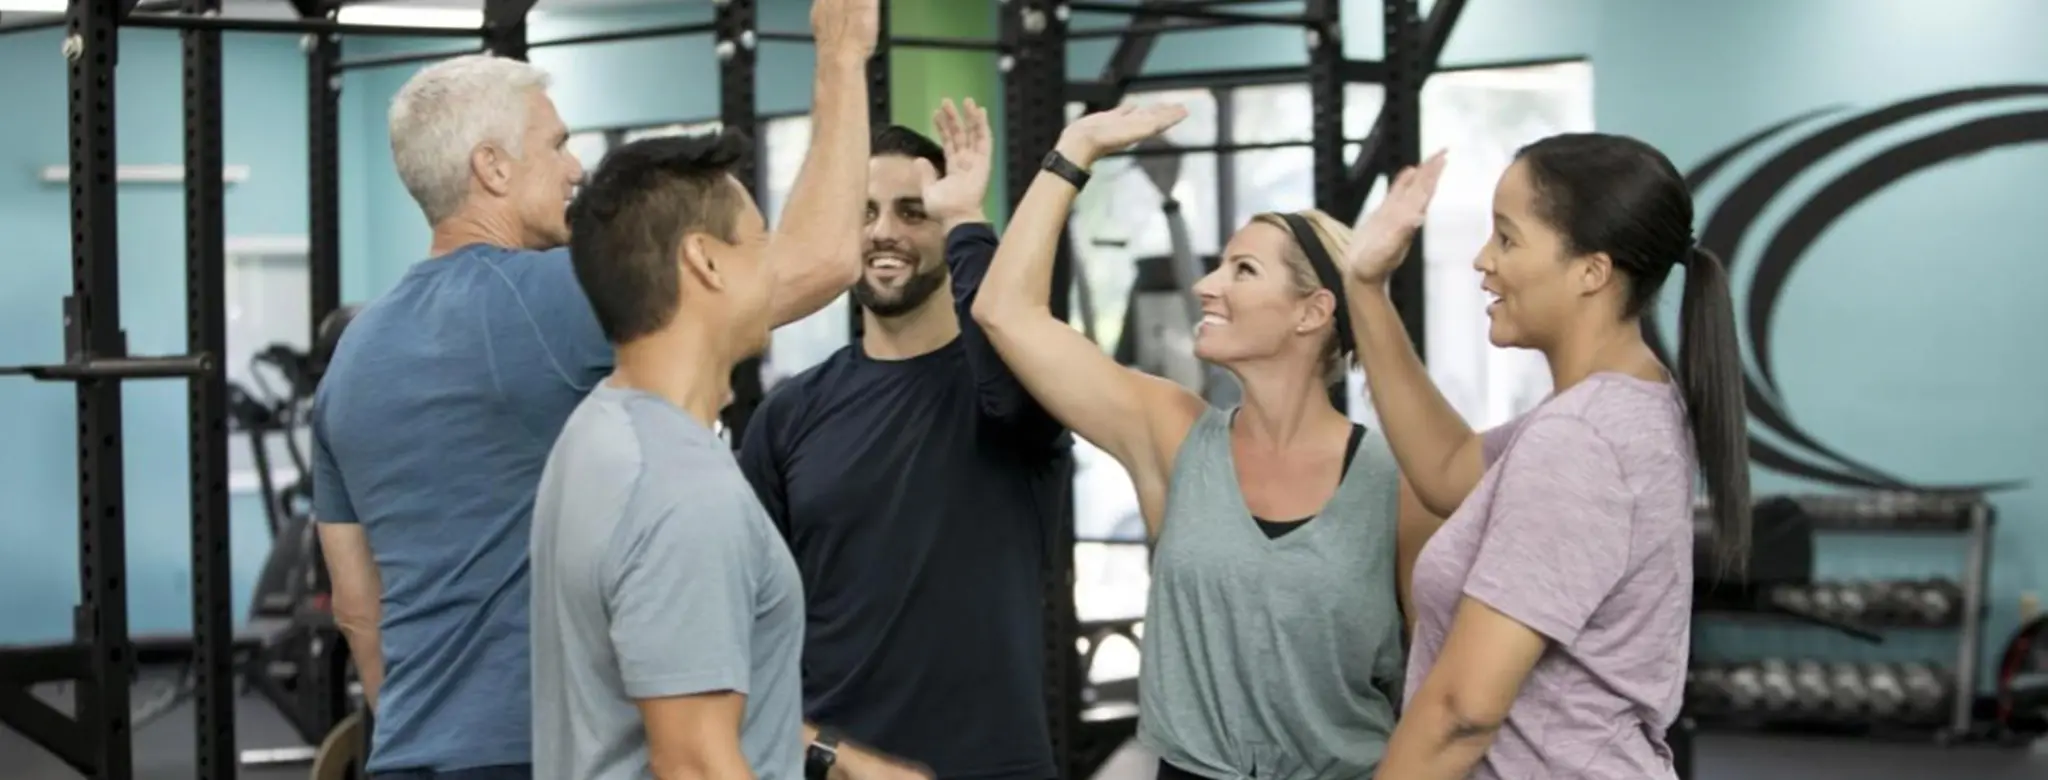 group of people high fiving in the gym